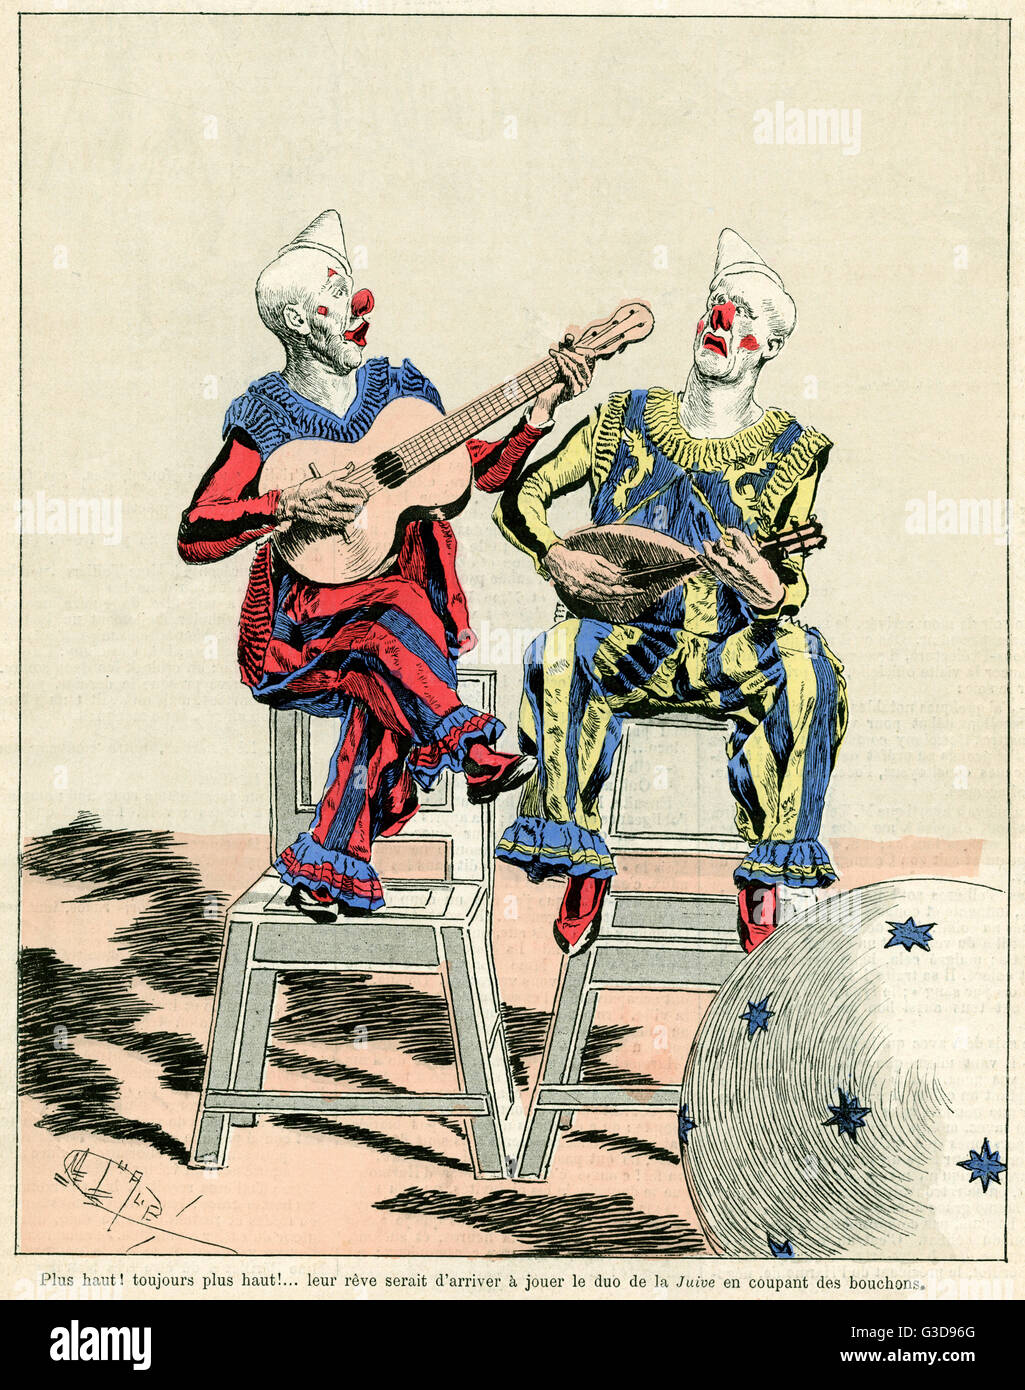 At the circus, two clowns playing musical instruments 1888 Stock Photo